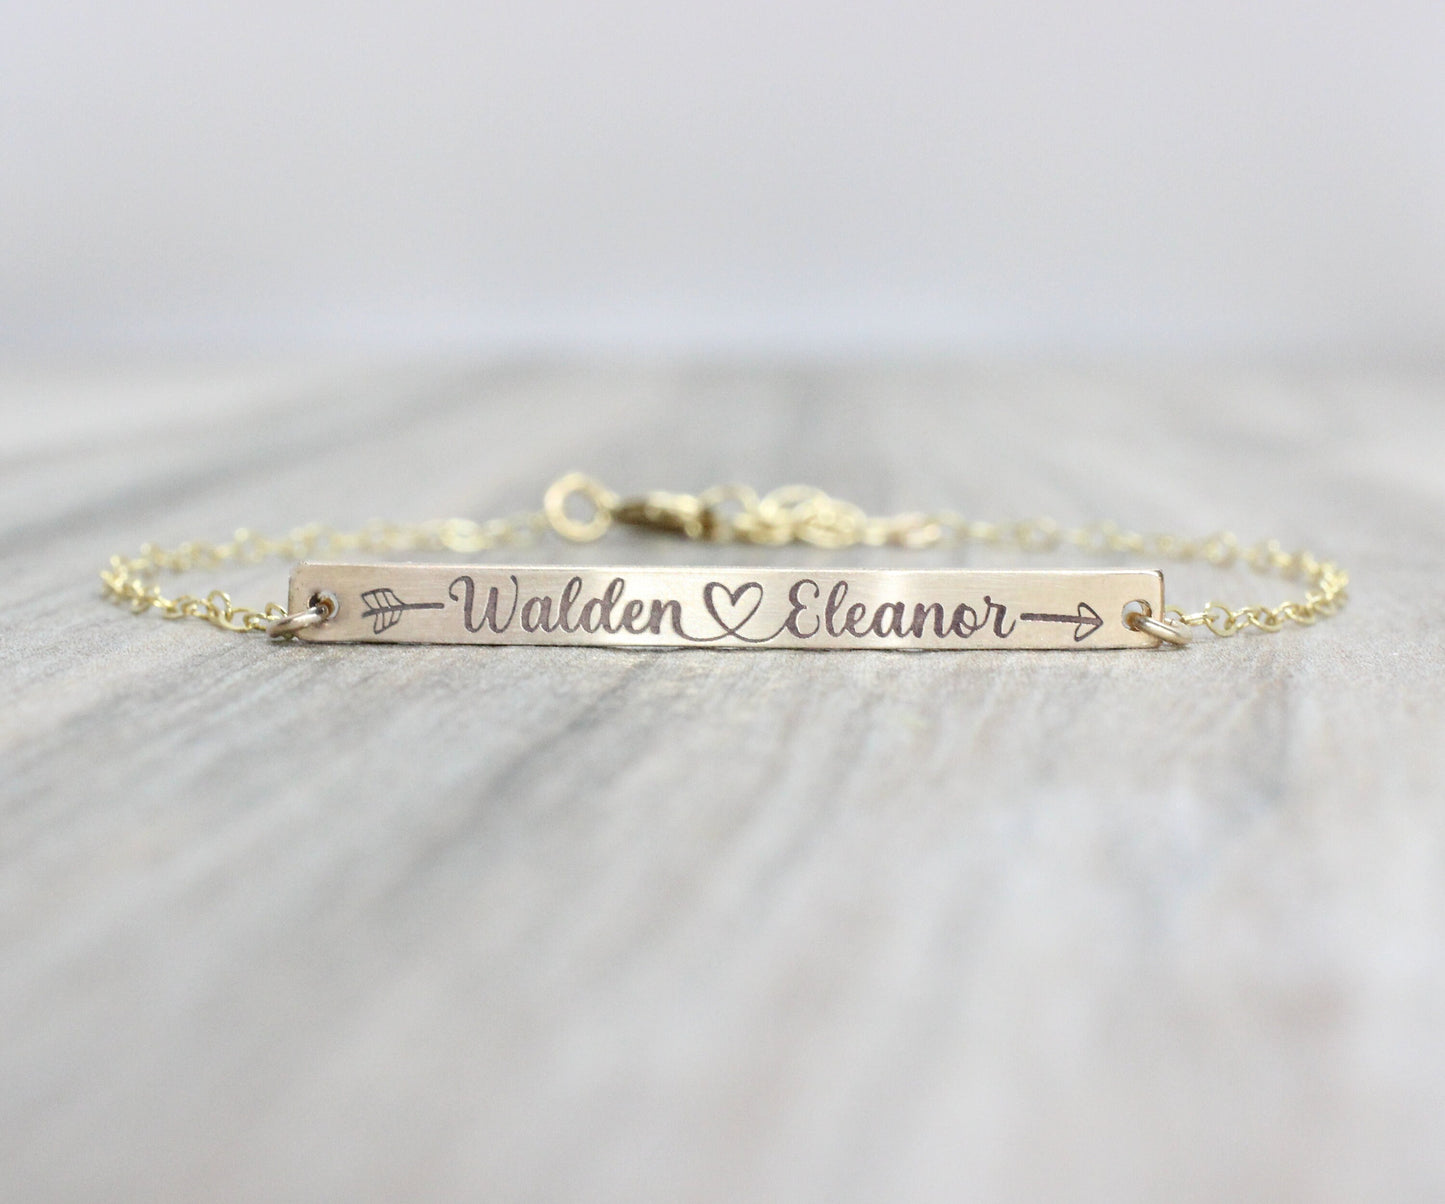 14k Gold Filled Bar Bracelet with Personalized Engraving Names, Dates, Roman Numerals, Initials Gold Filled or Sterling Silver Gifts For Her